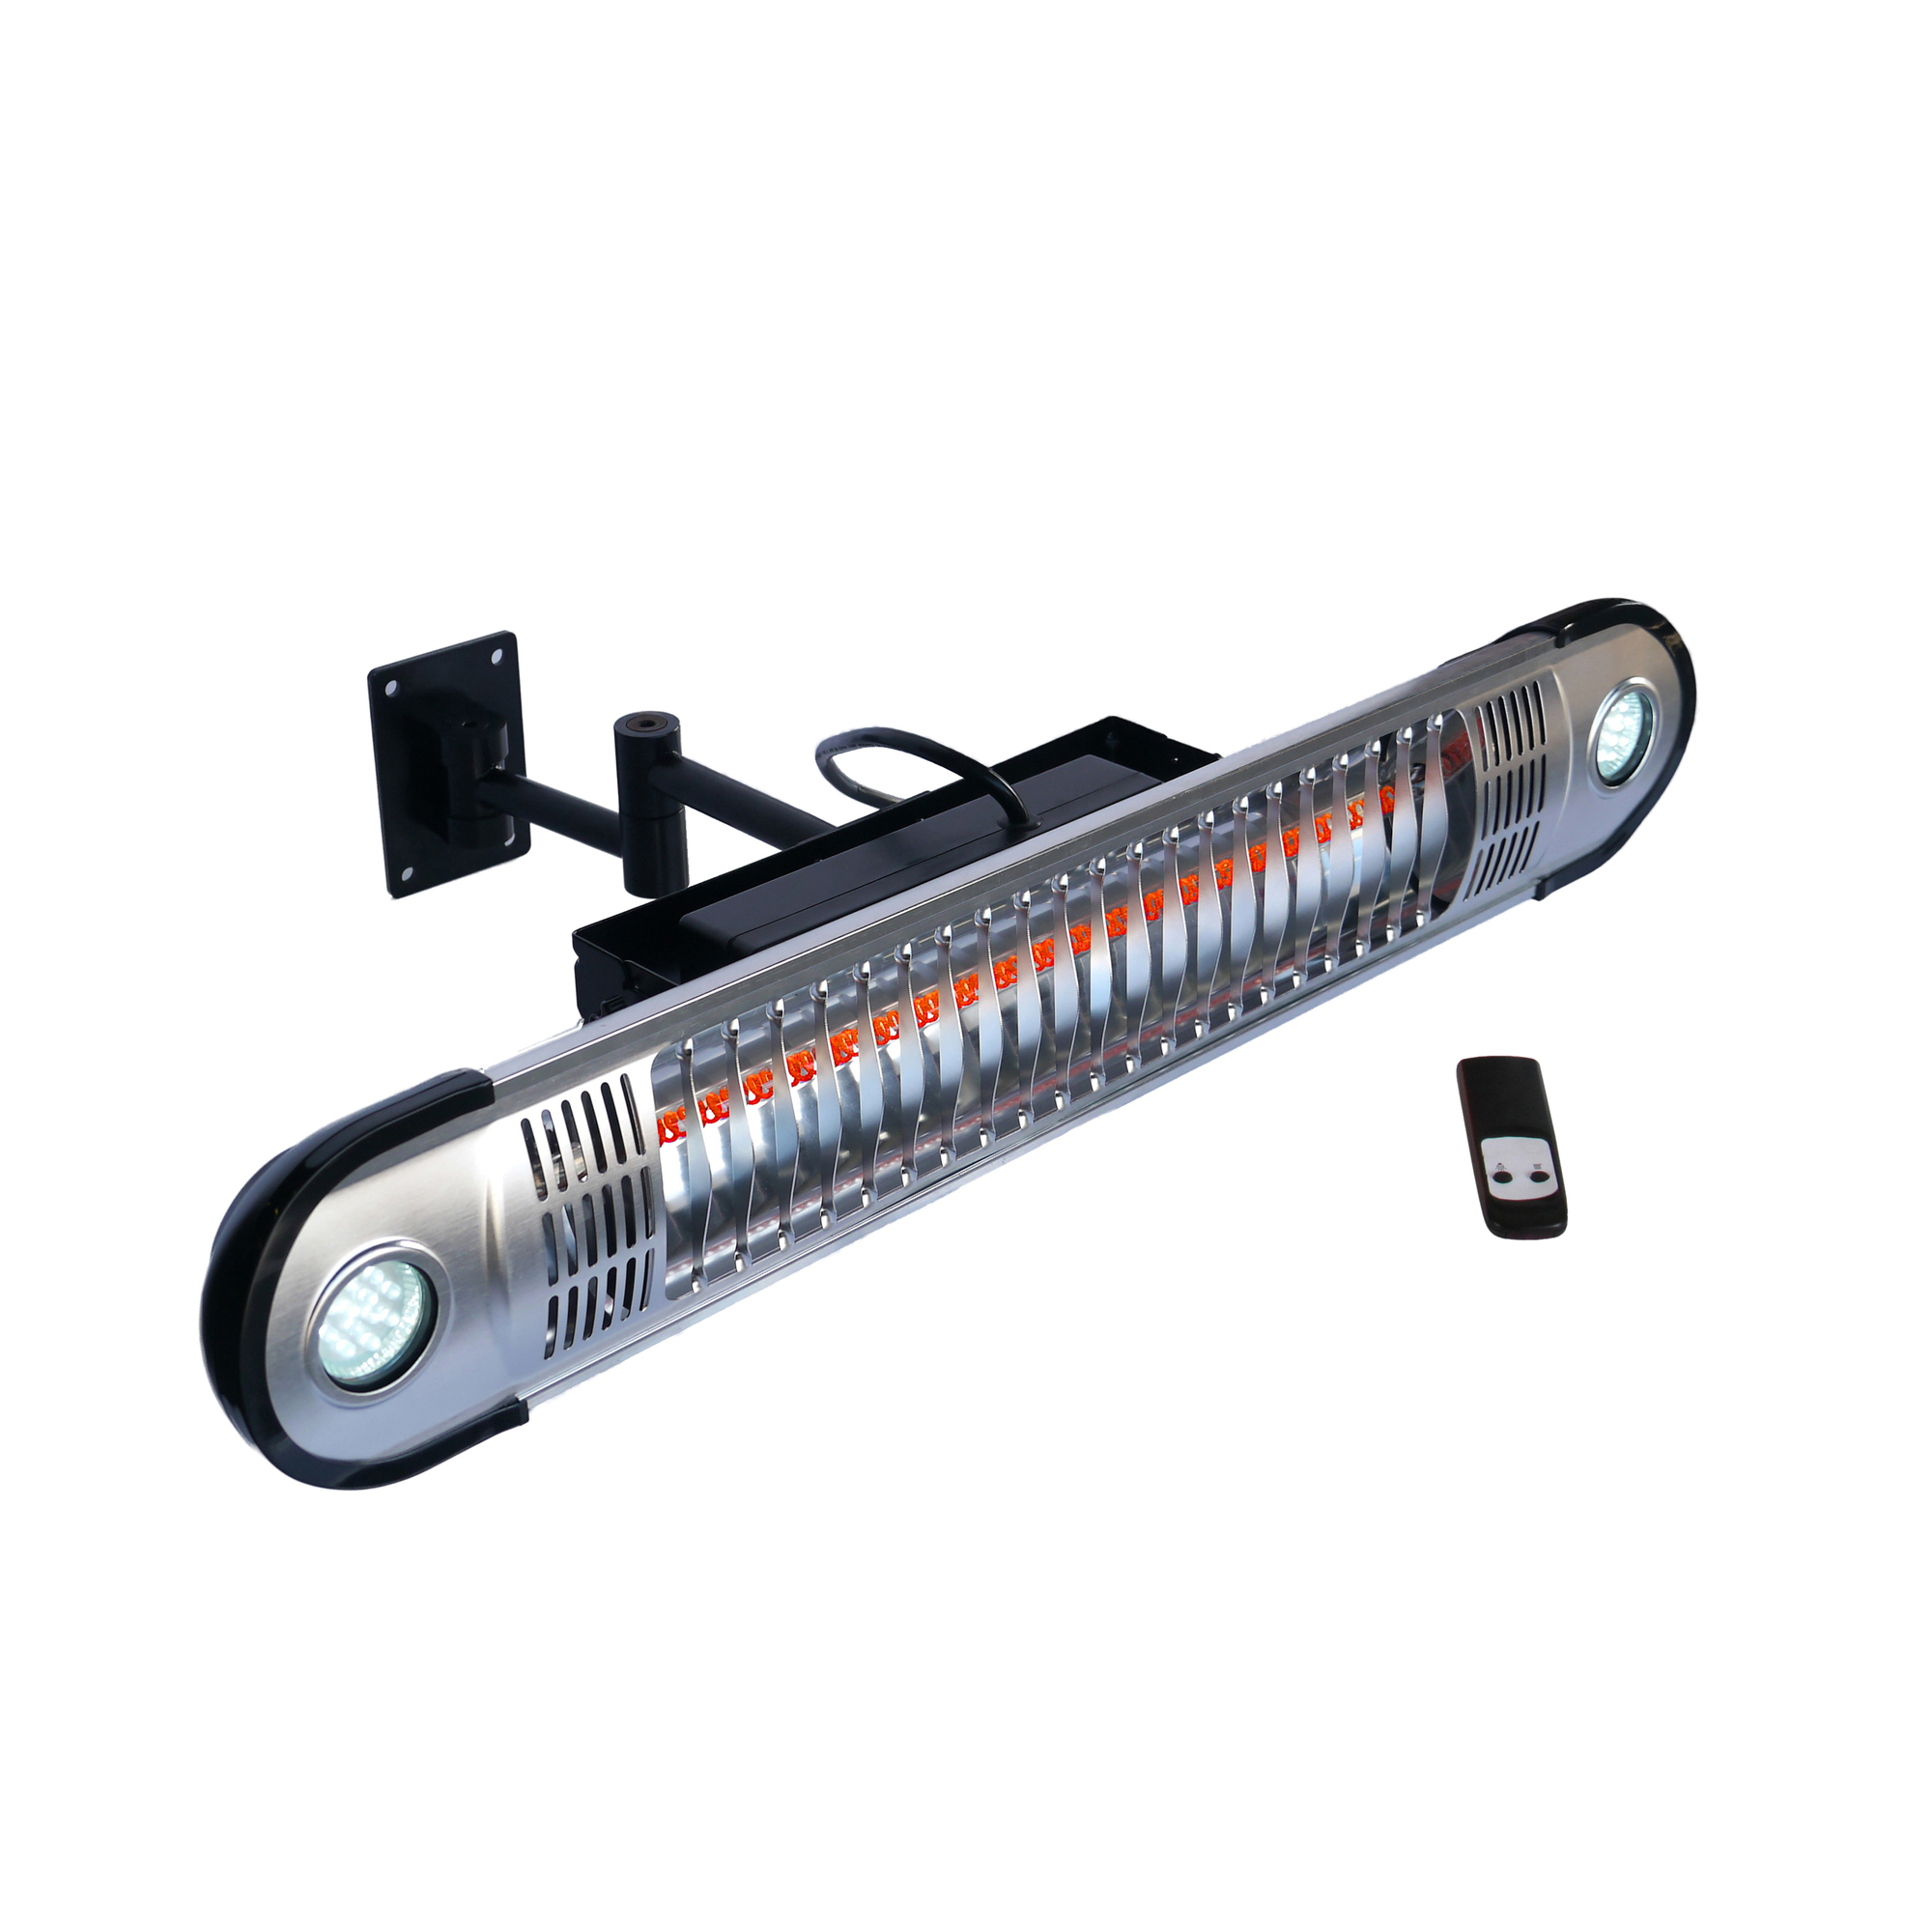 ENERG+, Wall mounted patio heater with dual LED, Model HEA-21533